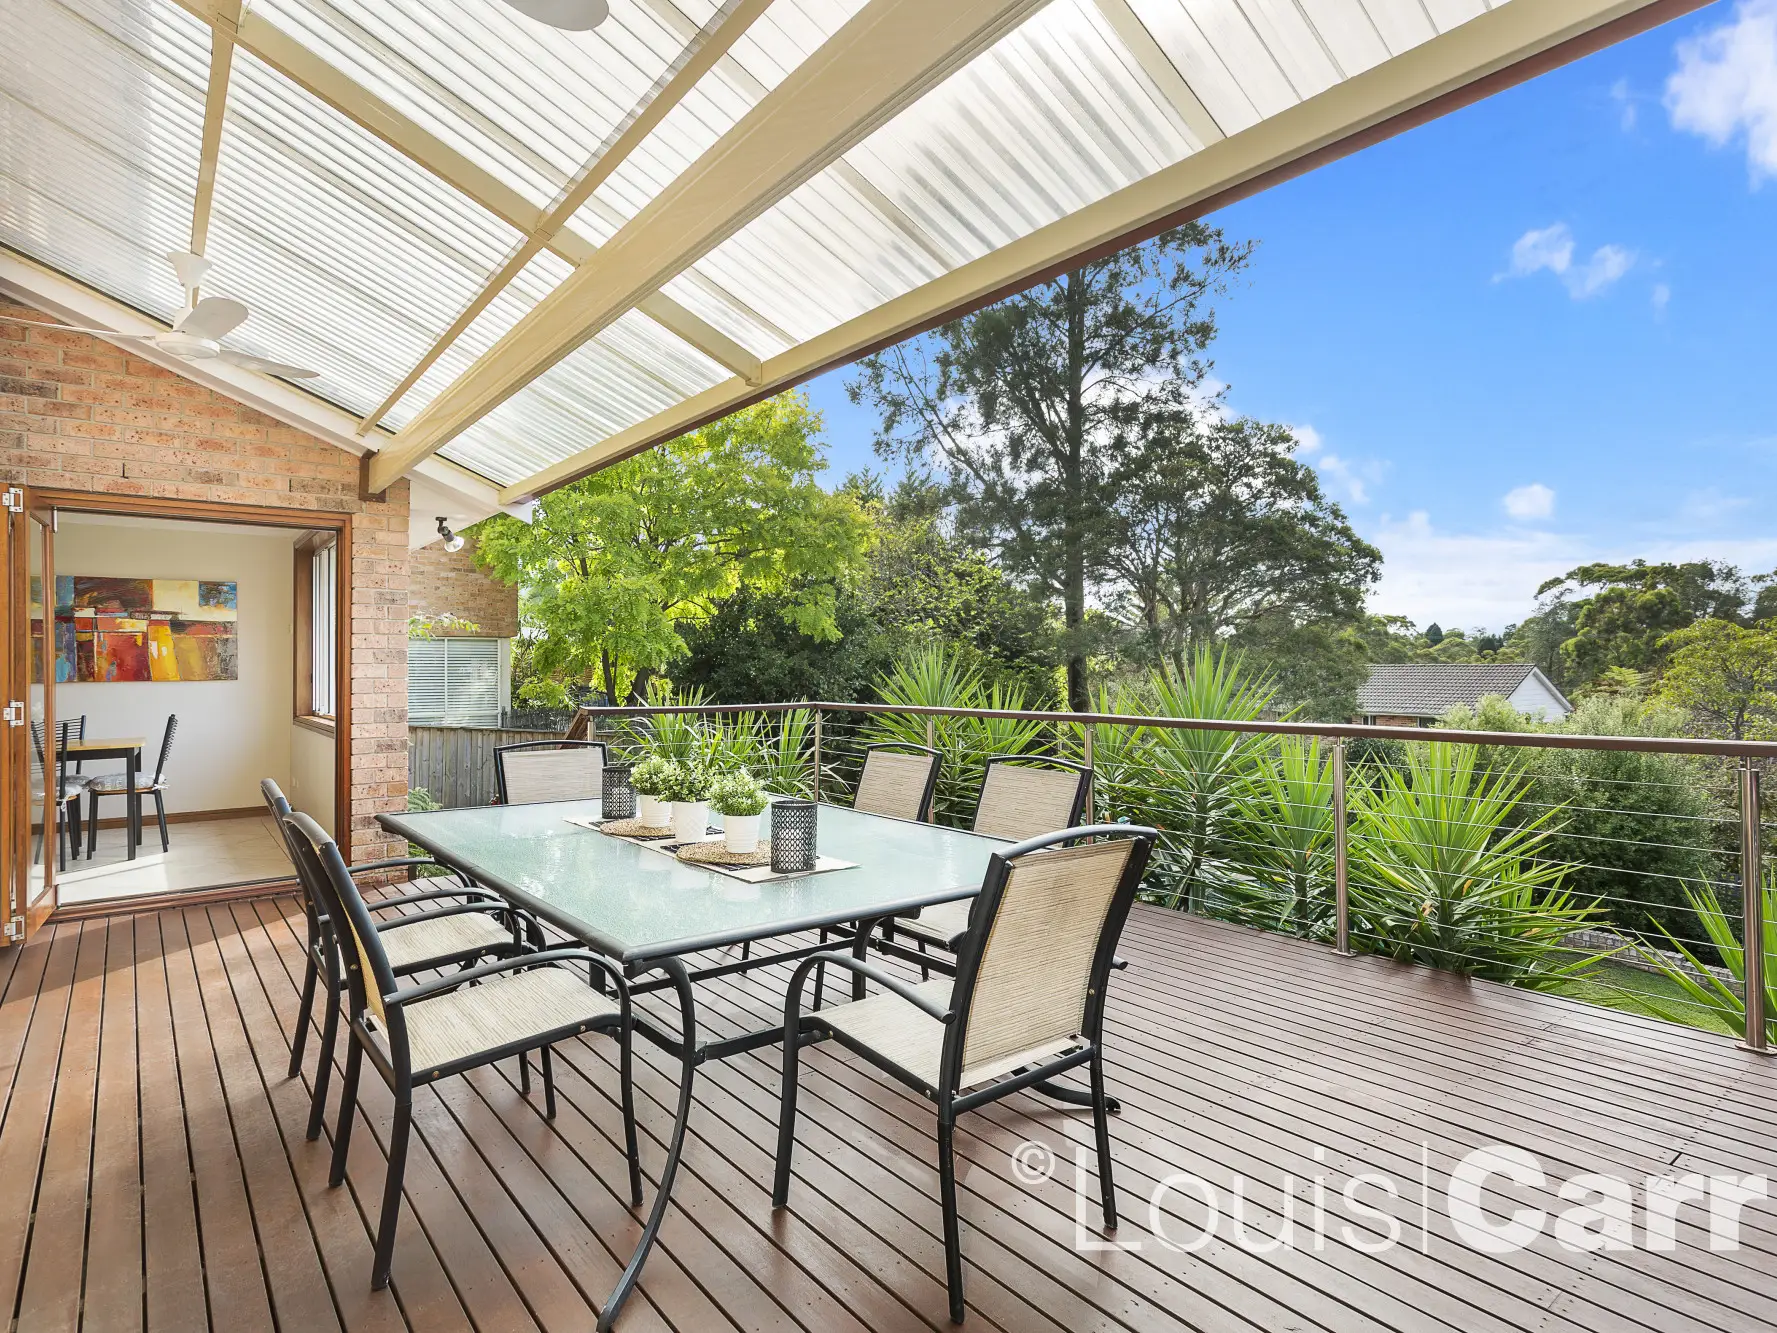 Photo #3: 6 Pineview Place, Dural - Sold by Louis Carr Real Estate